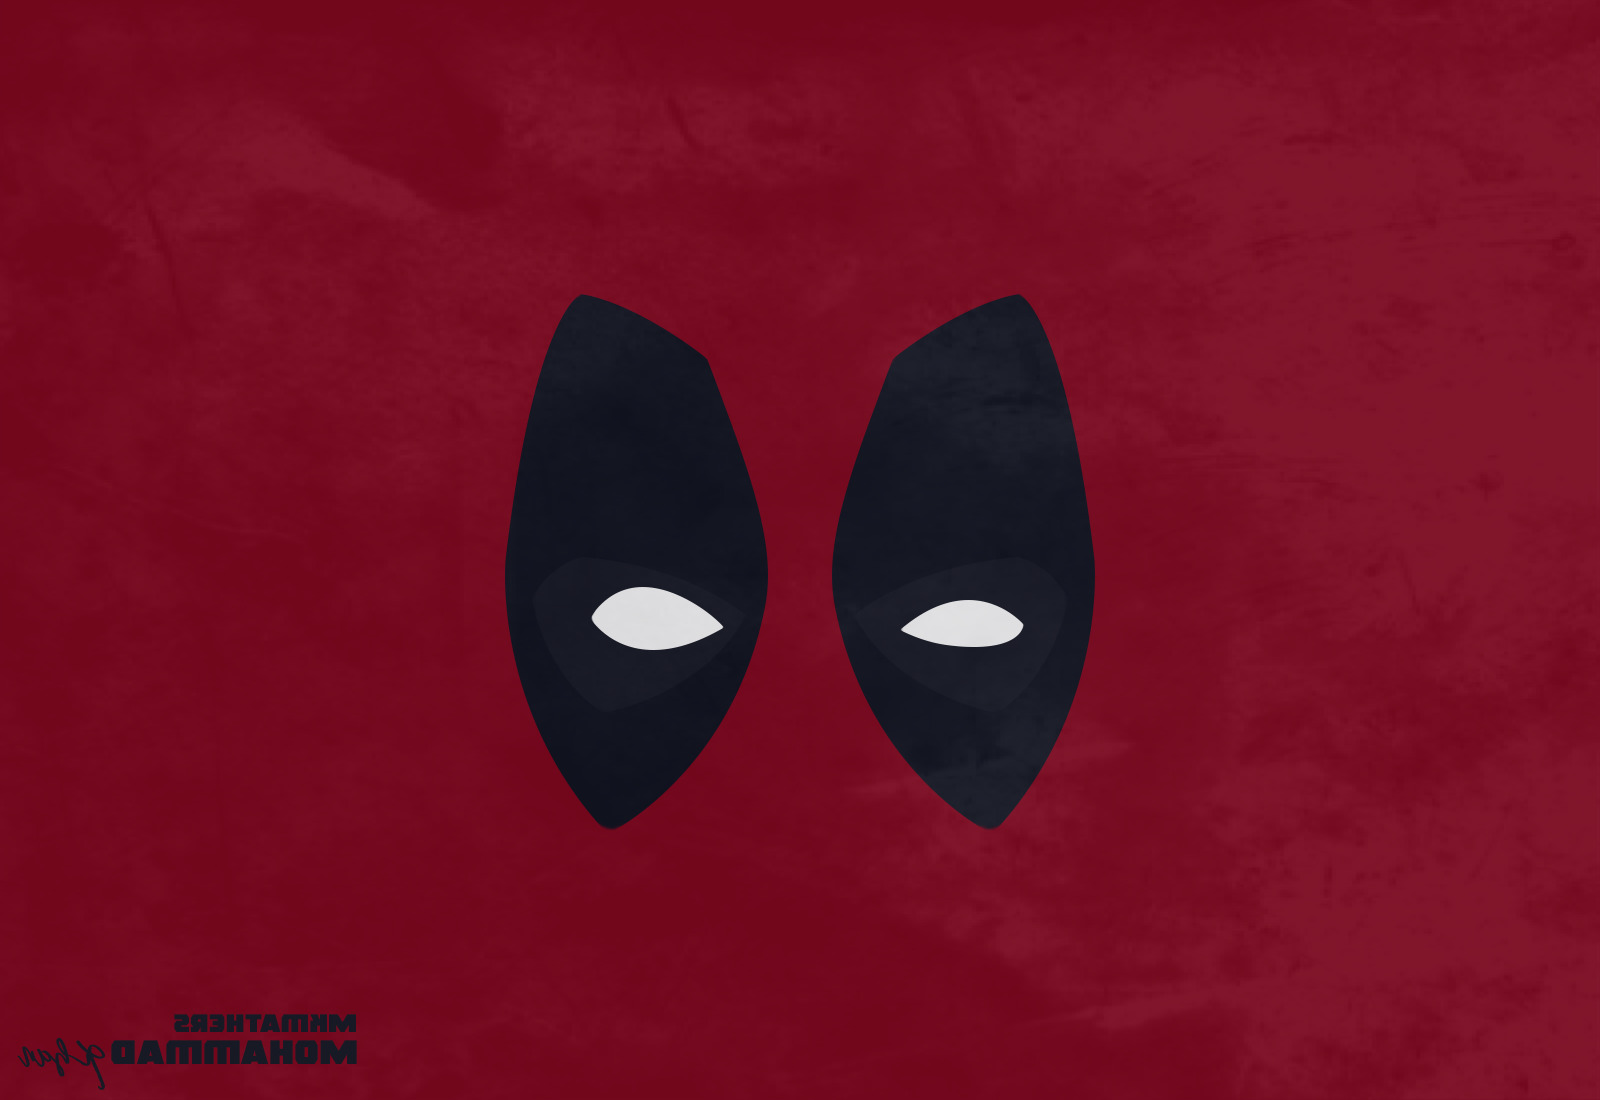 Mkmathers, MohammadKhan, Deadpool, Merc With A Mouth, Marvel Comics Wallpaper